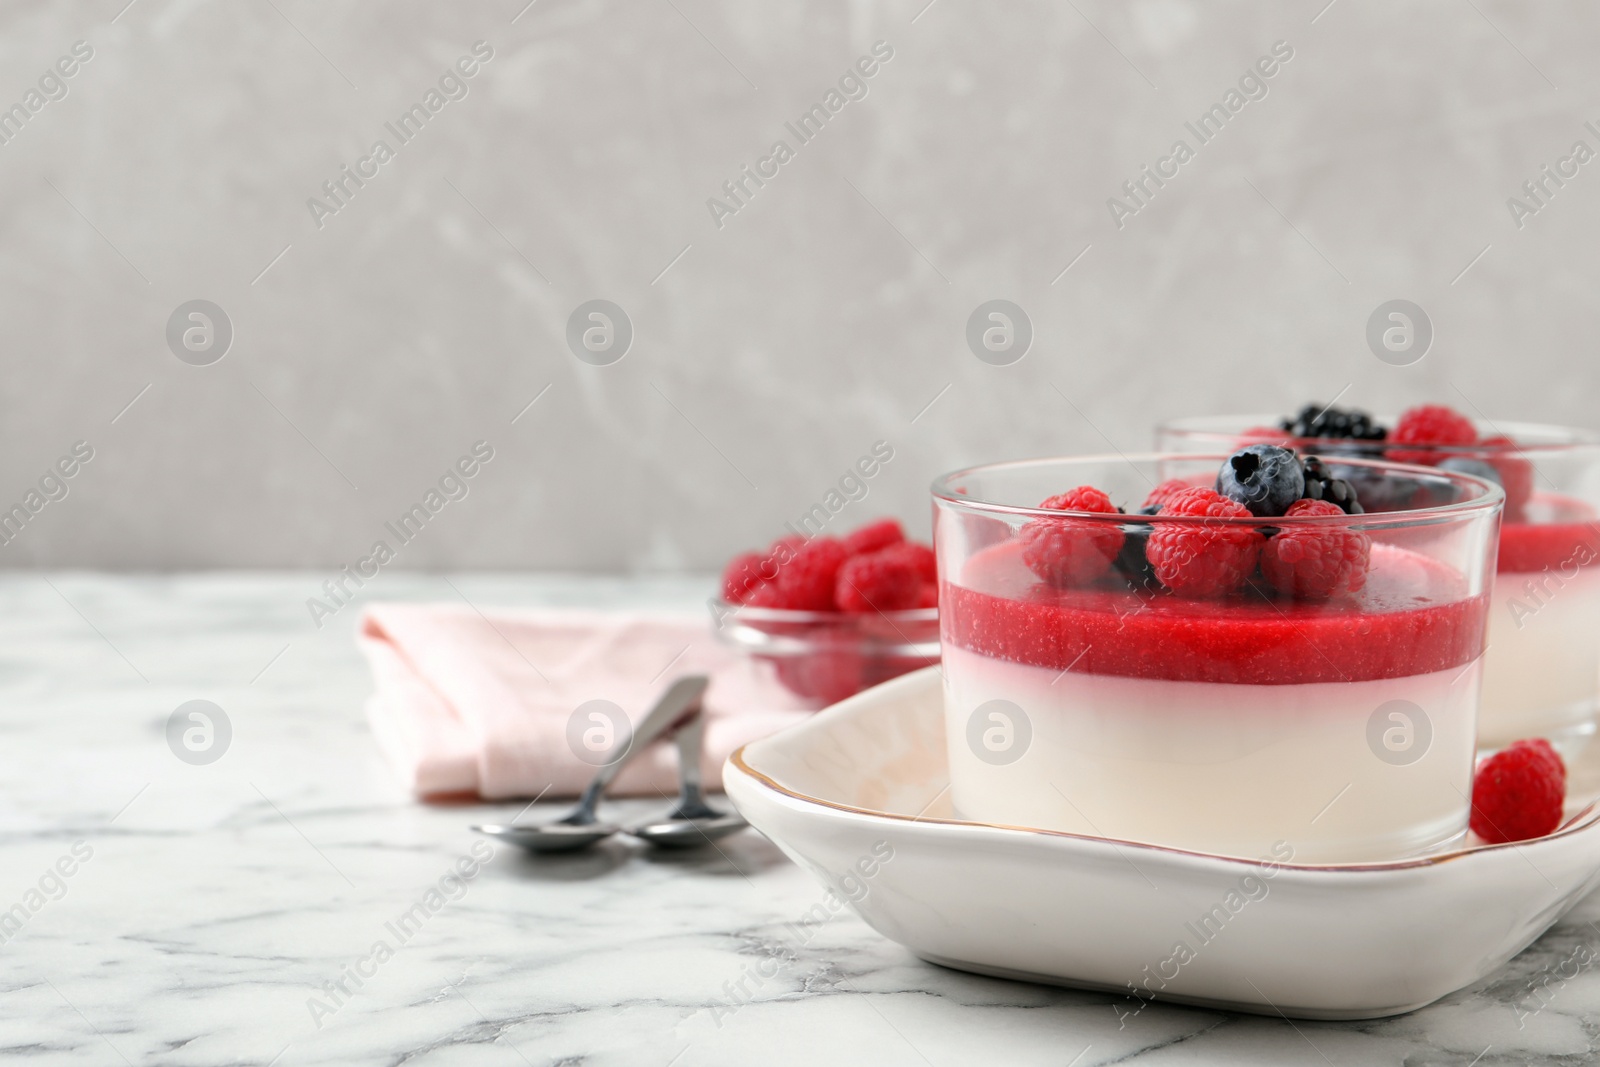 Photo of Delicious panna cotta with fruit coulis and fresh berries served on white marble table. Space for text